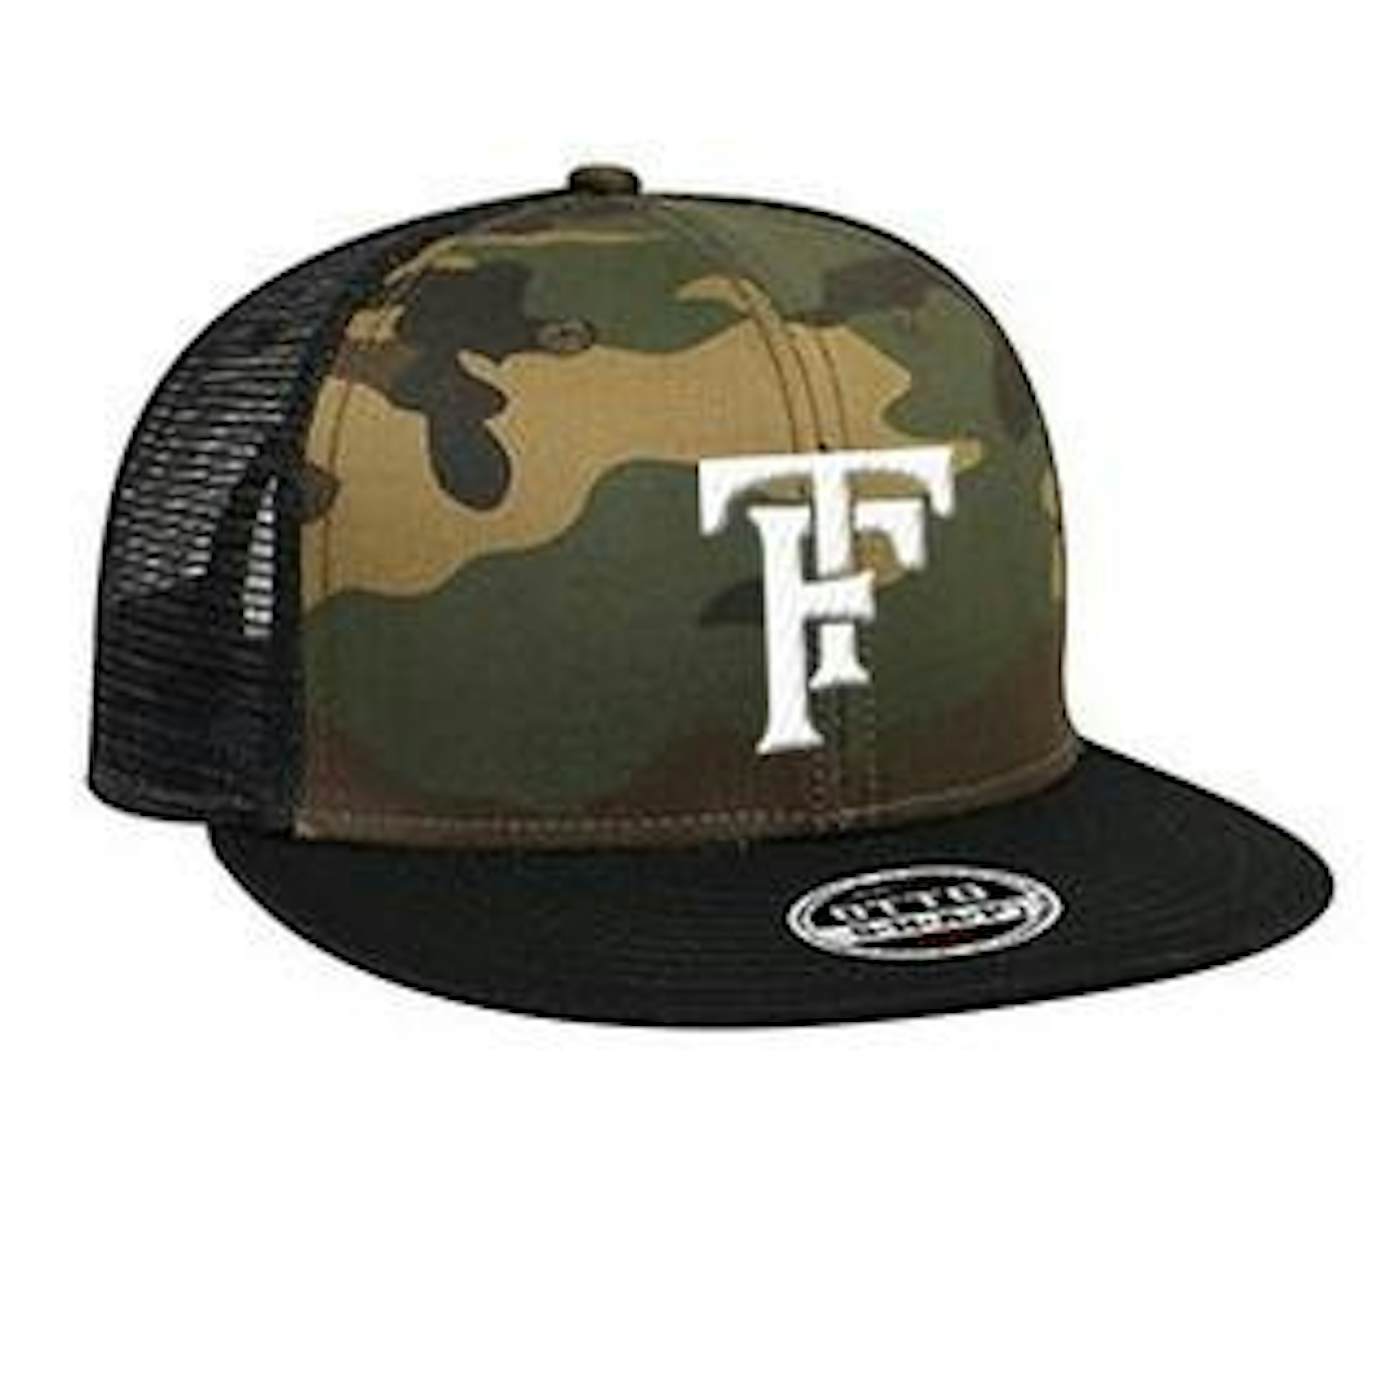 Tyler Farr Initials Camouflage Hat